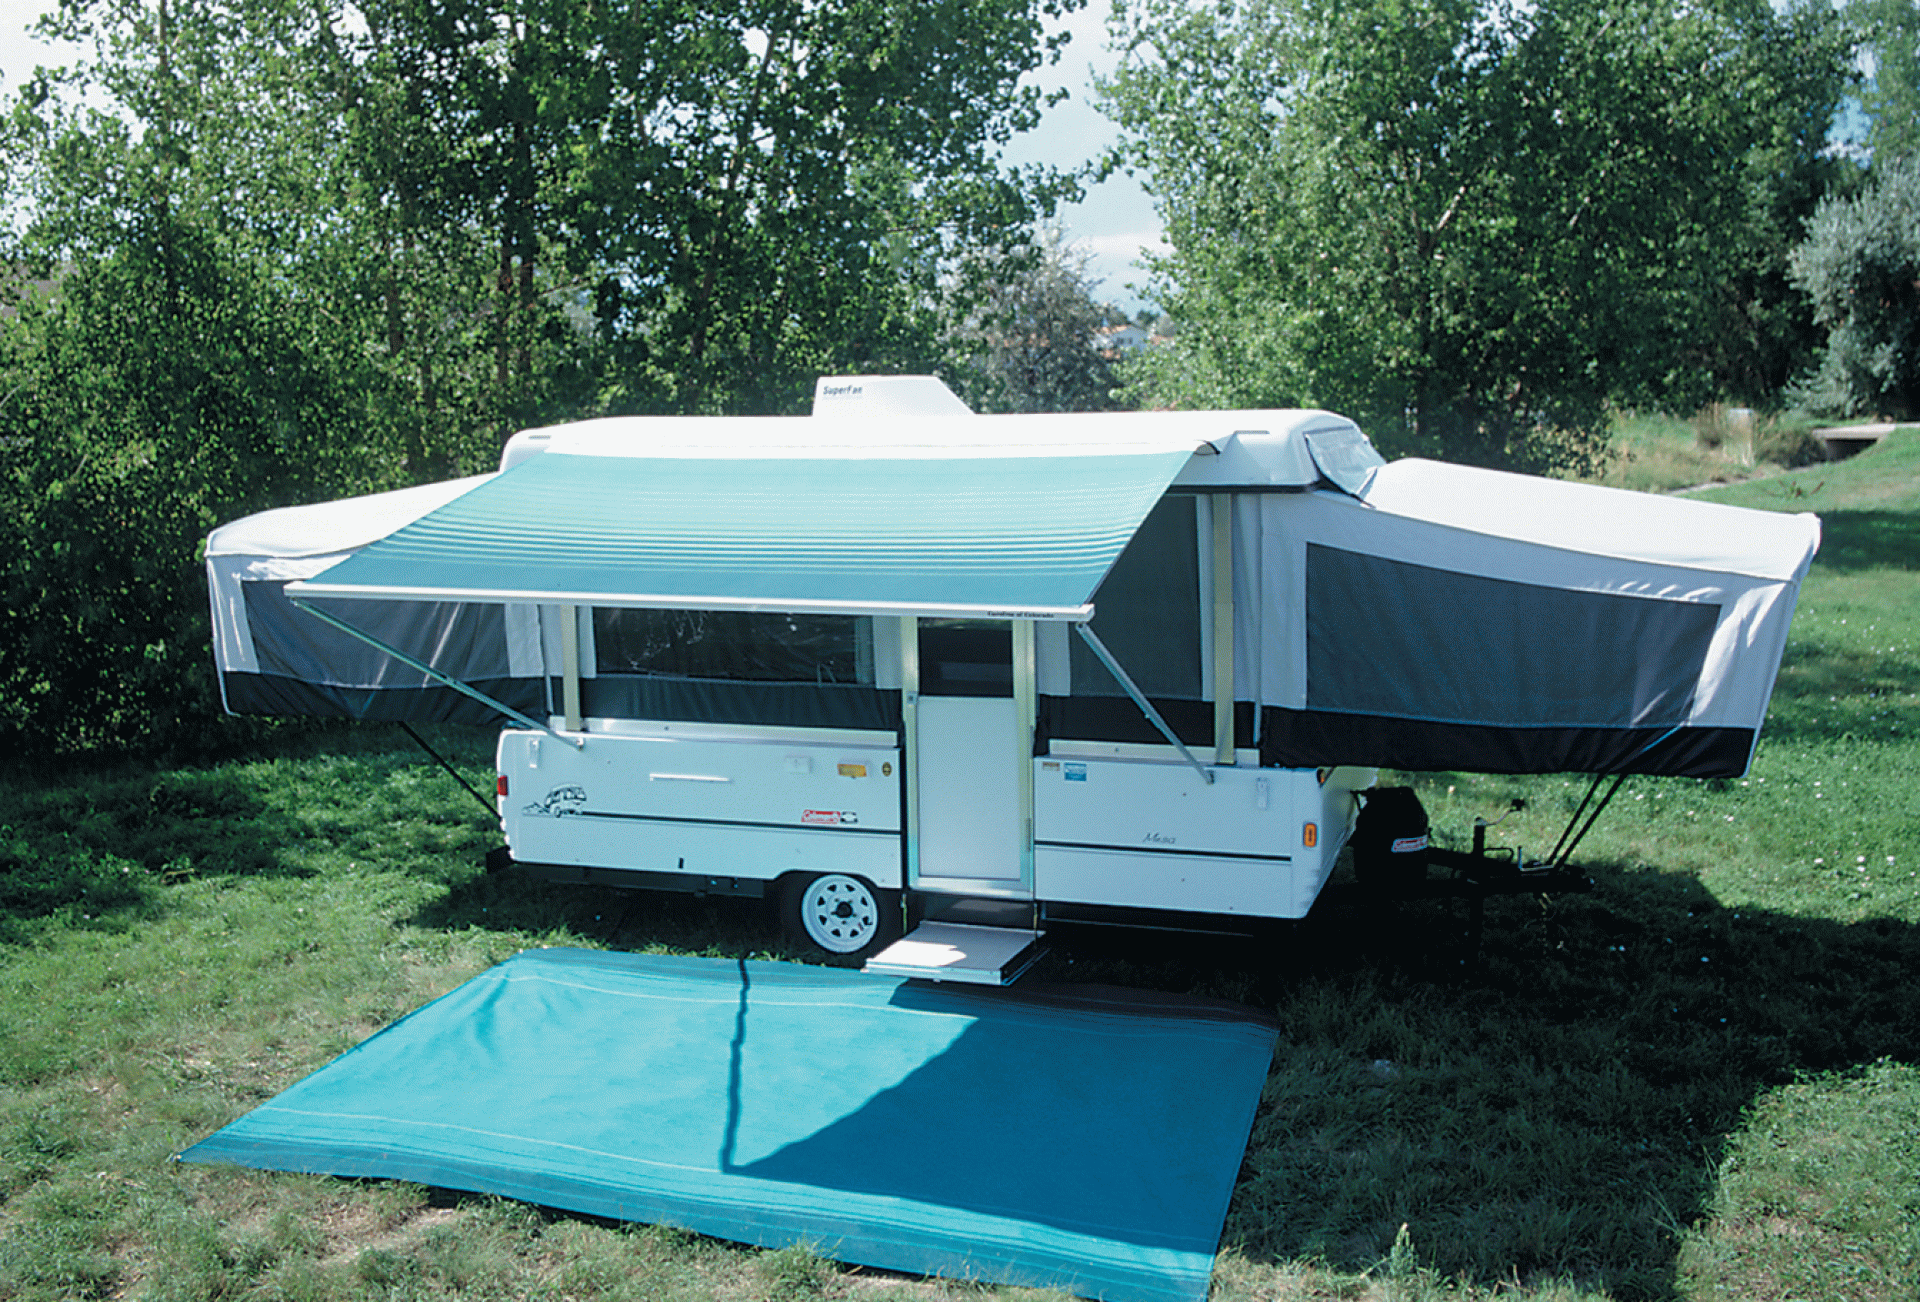 CAREFREE OF COLORADO | 981578E00 | Campout Awning Metric 4.0 13' 1" Ocean Blue Dune Stripe With White Bag